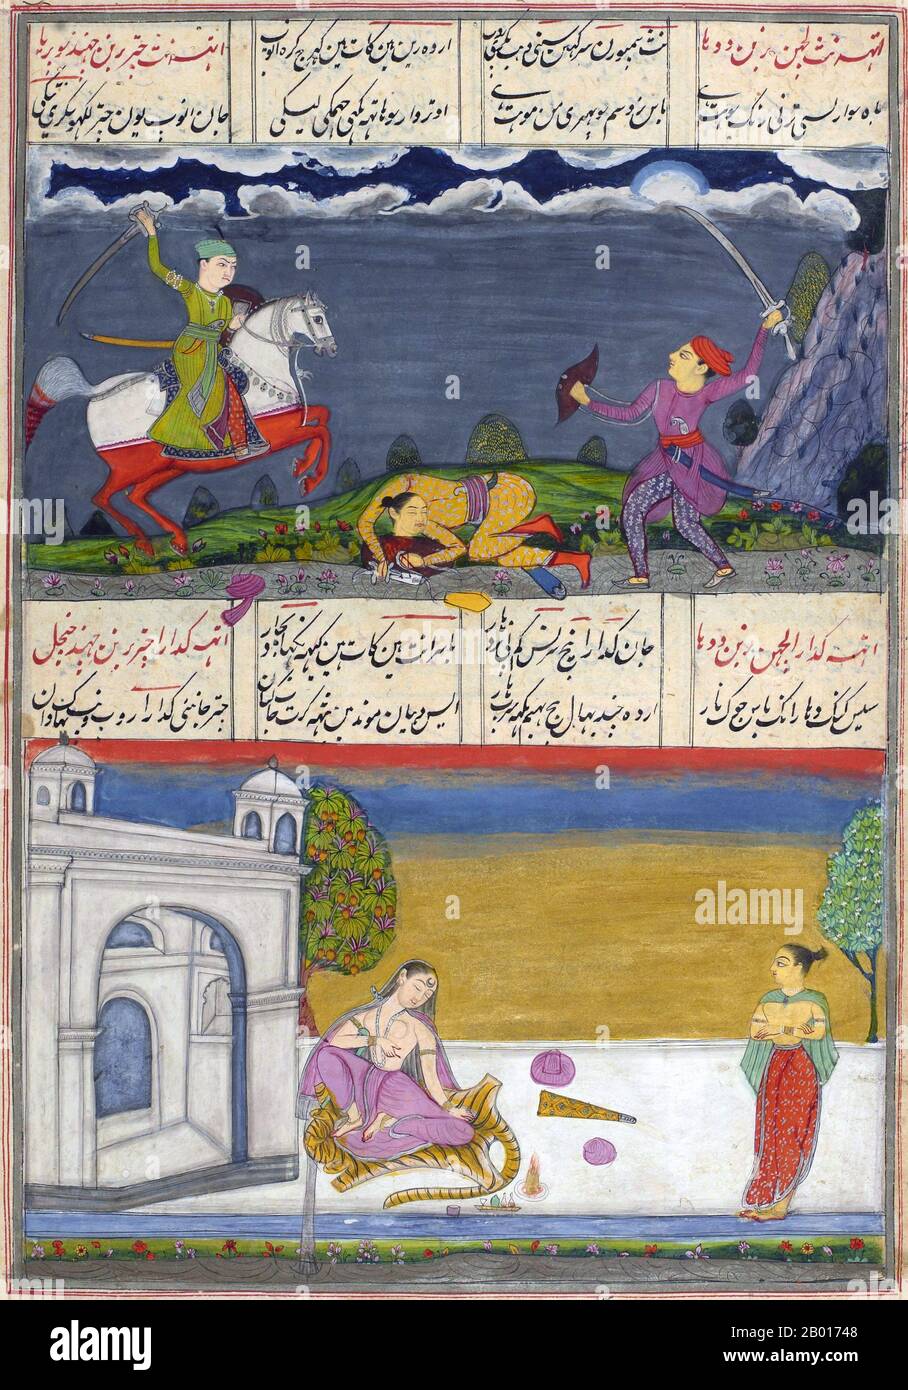 India: 'Above: Nat Ragini on horseback and holding a sword above decapitated body, about to attack a second enemy; Below: Kedara Ragini, wearing cape and culottes with a crescent moon on her forehead and sitting on tiger-skin, with female attendant'. Ragamala miniature painting, c. 1800.  Ragamala Paintings are a series of illustrative paintings from medieval India based on Ragamala or the 'Garland of Ragas', depicting various Indian musical nodes, Ragas. They stand as a classical example of the amalgamation of art, poetry and classical music in medieval India. Stock Photo